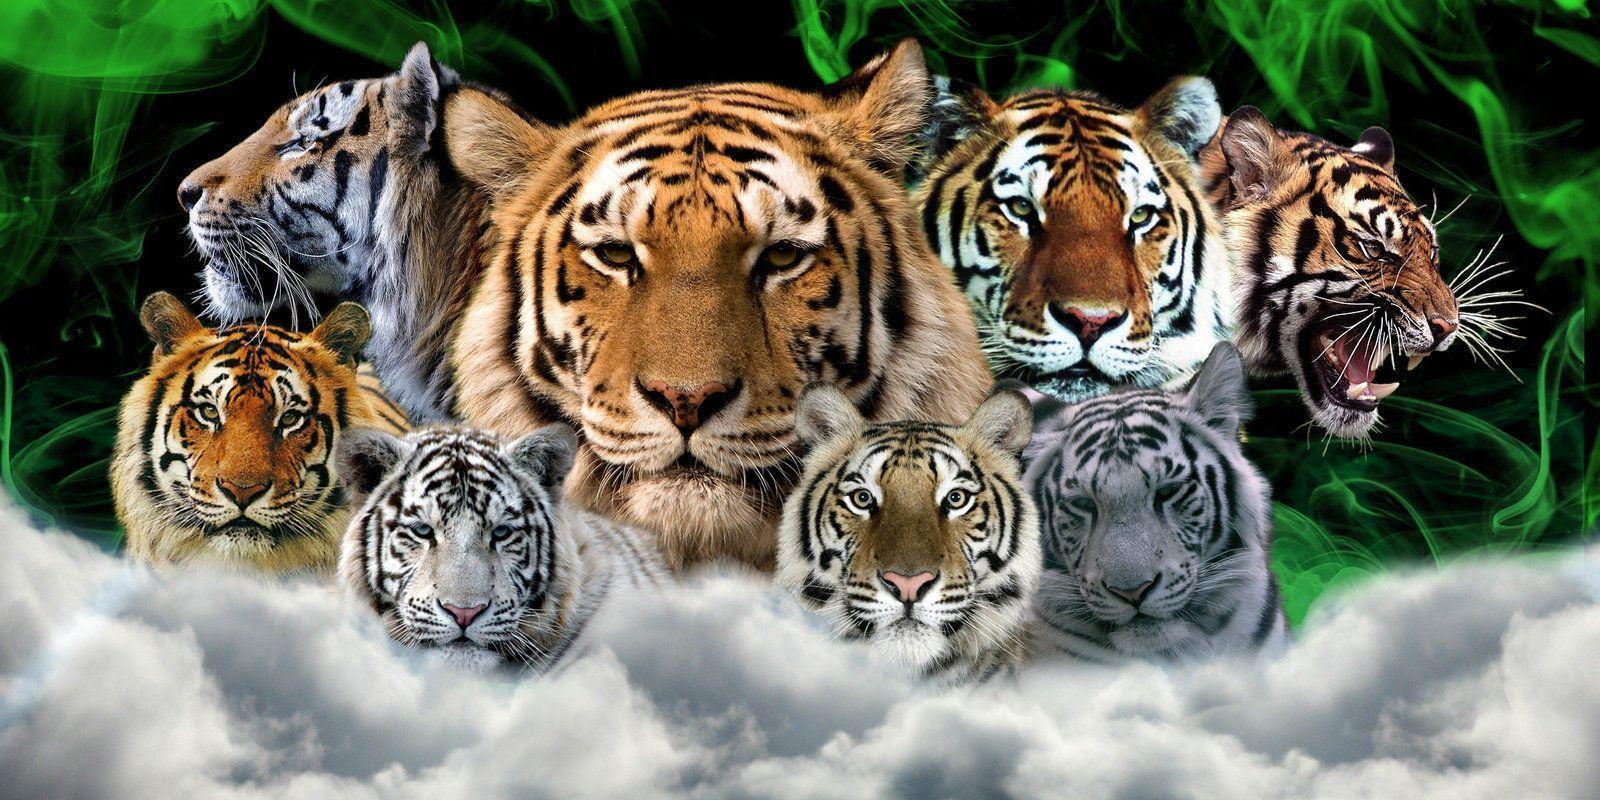 hd wallpaper of tigers (1).in. Find high Quality